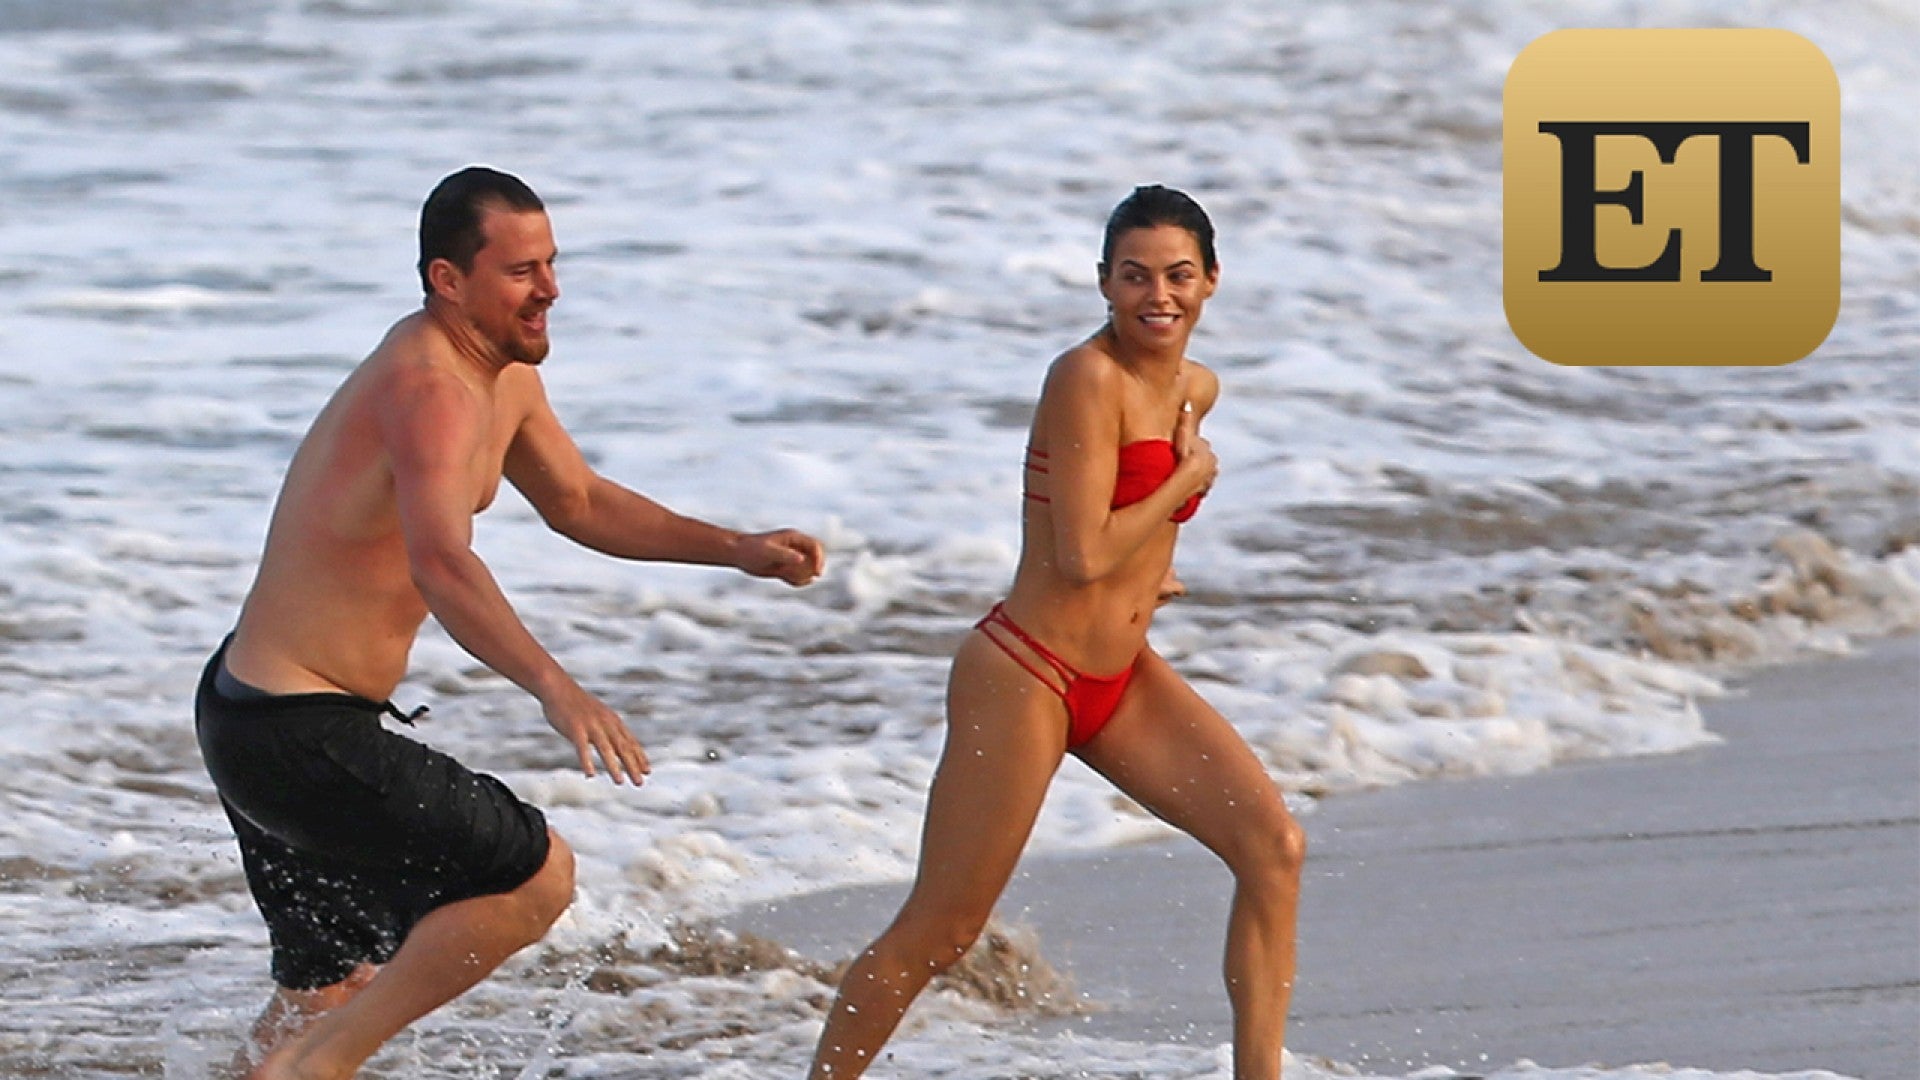 EXCLUSIVE PICS Jenna Dewan Shows Off Enviable Abs in Tiny Bikini During PDA-Filled Day With Channing Tatum Entertainment Tonight